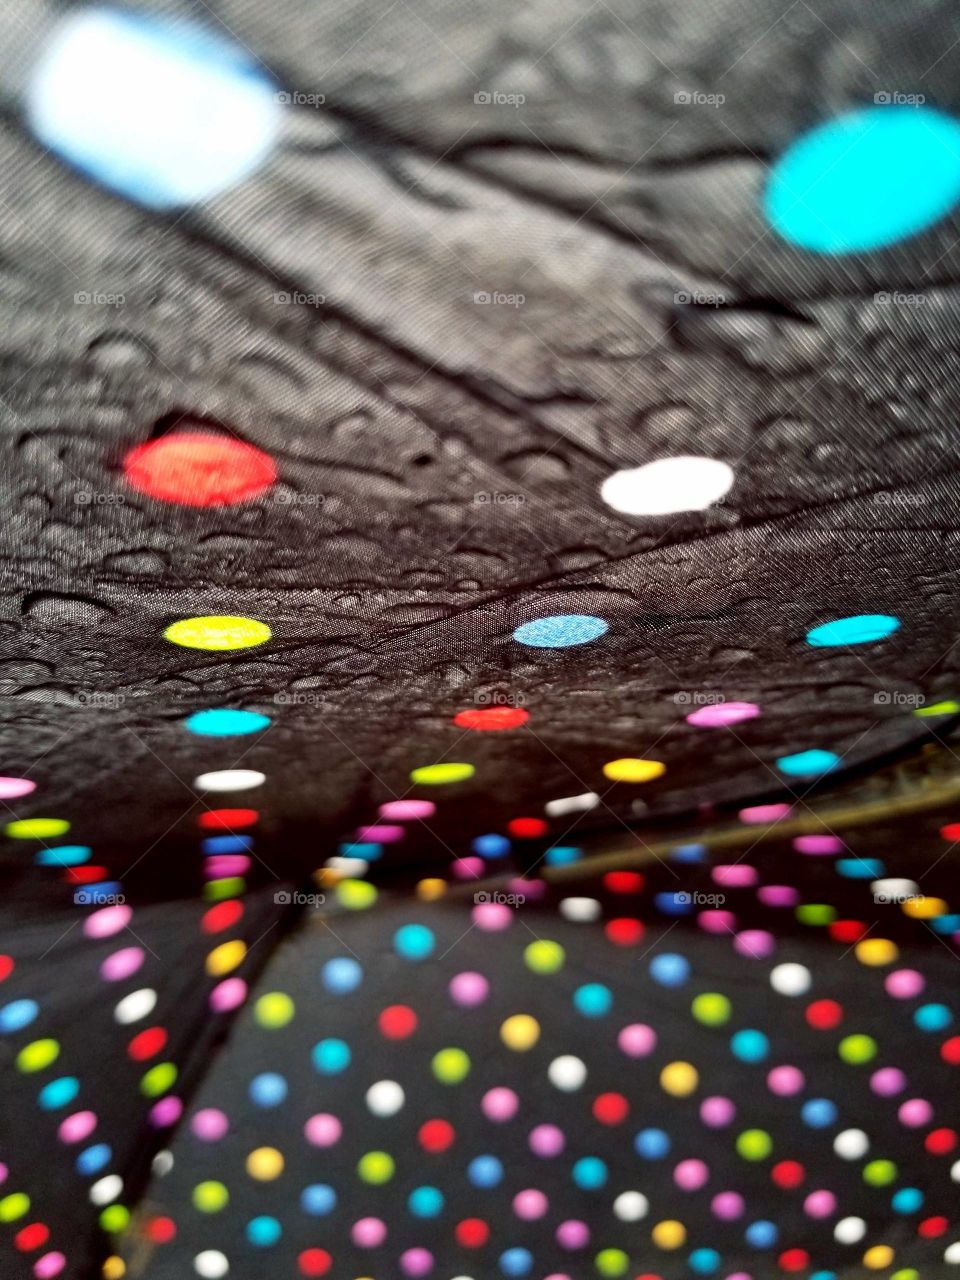 Inside a polka-dotted umbrella on a rainy day